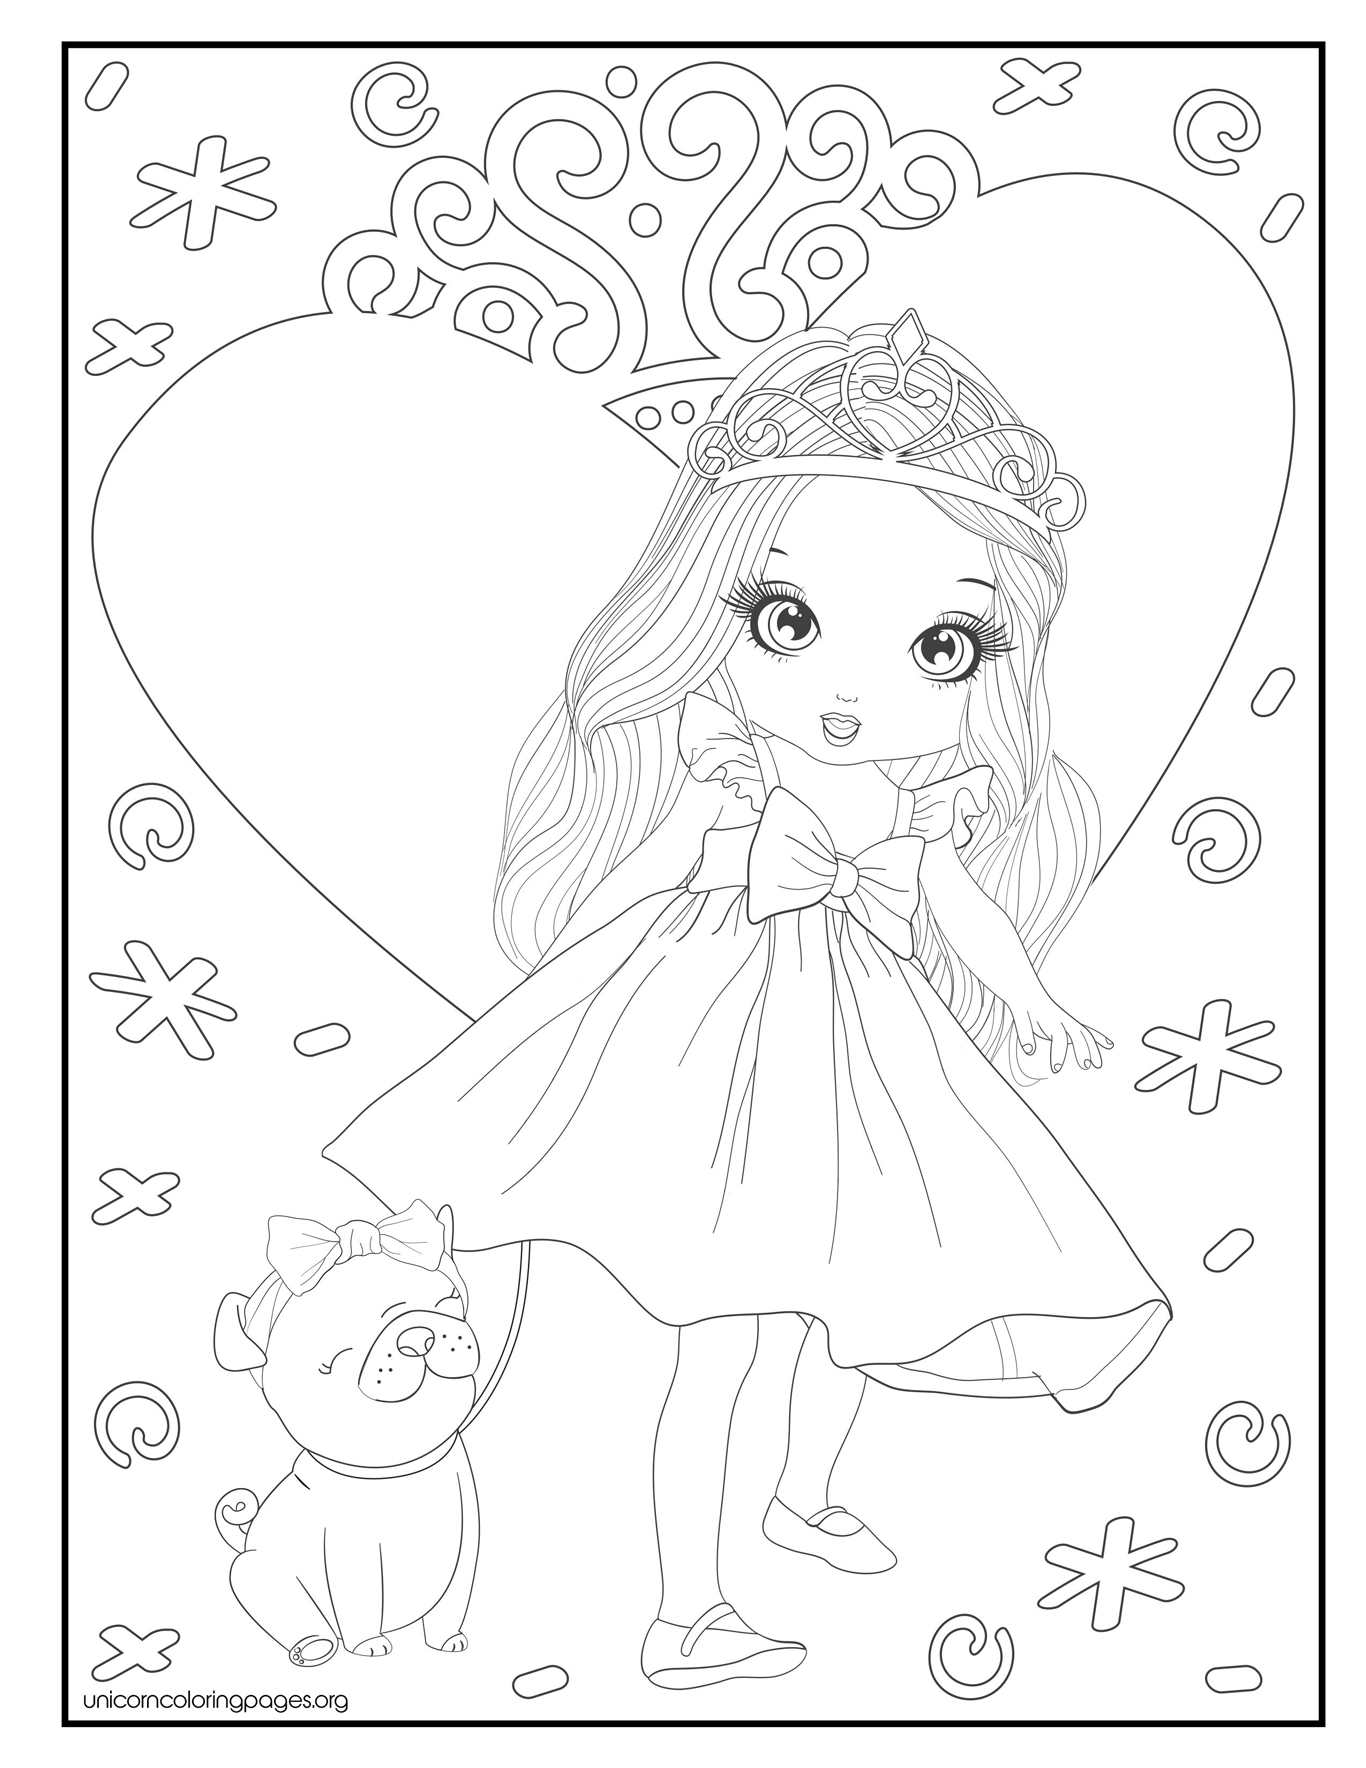 Free princess coloring pages for kids printable easy sheet